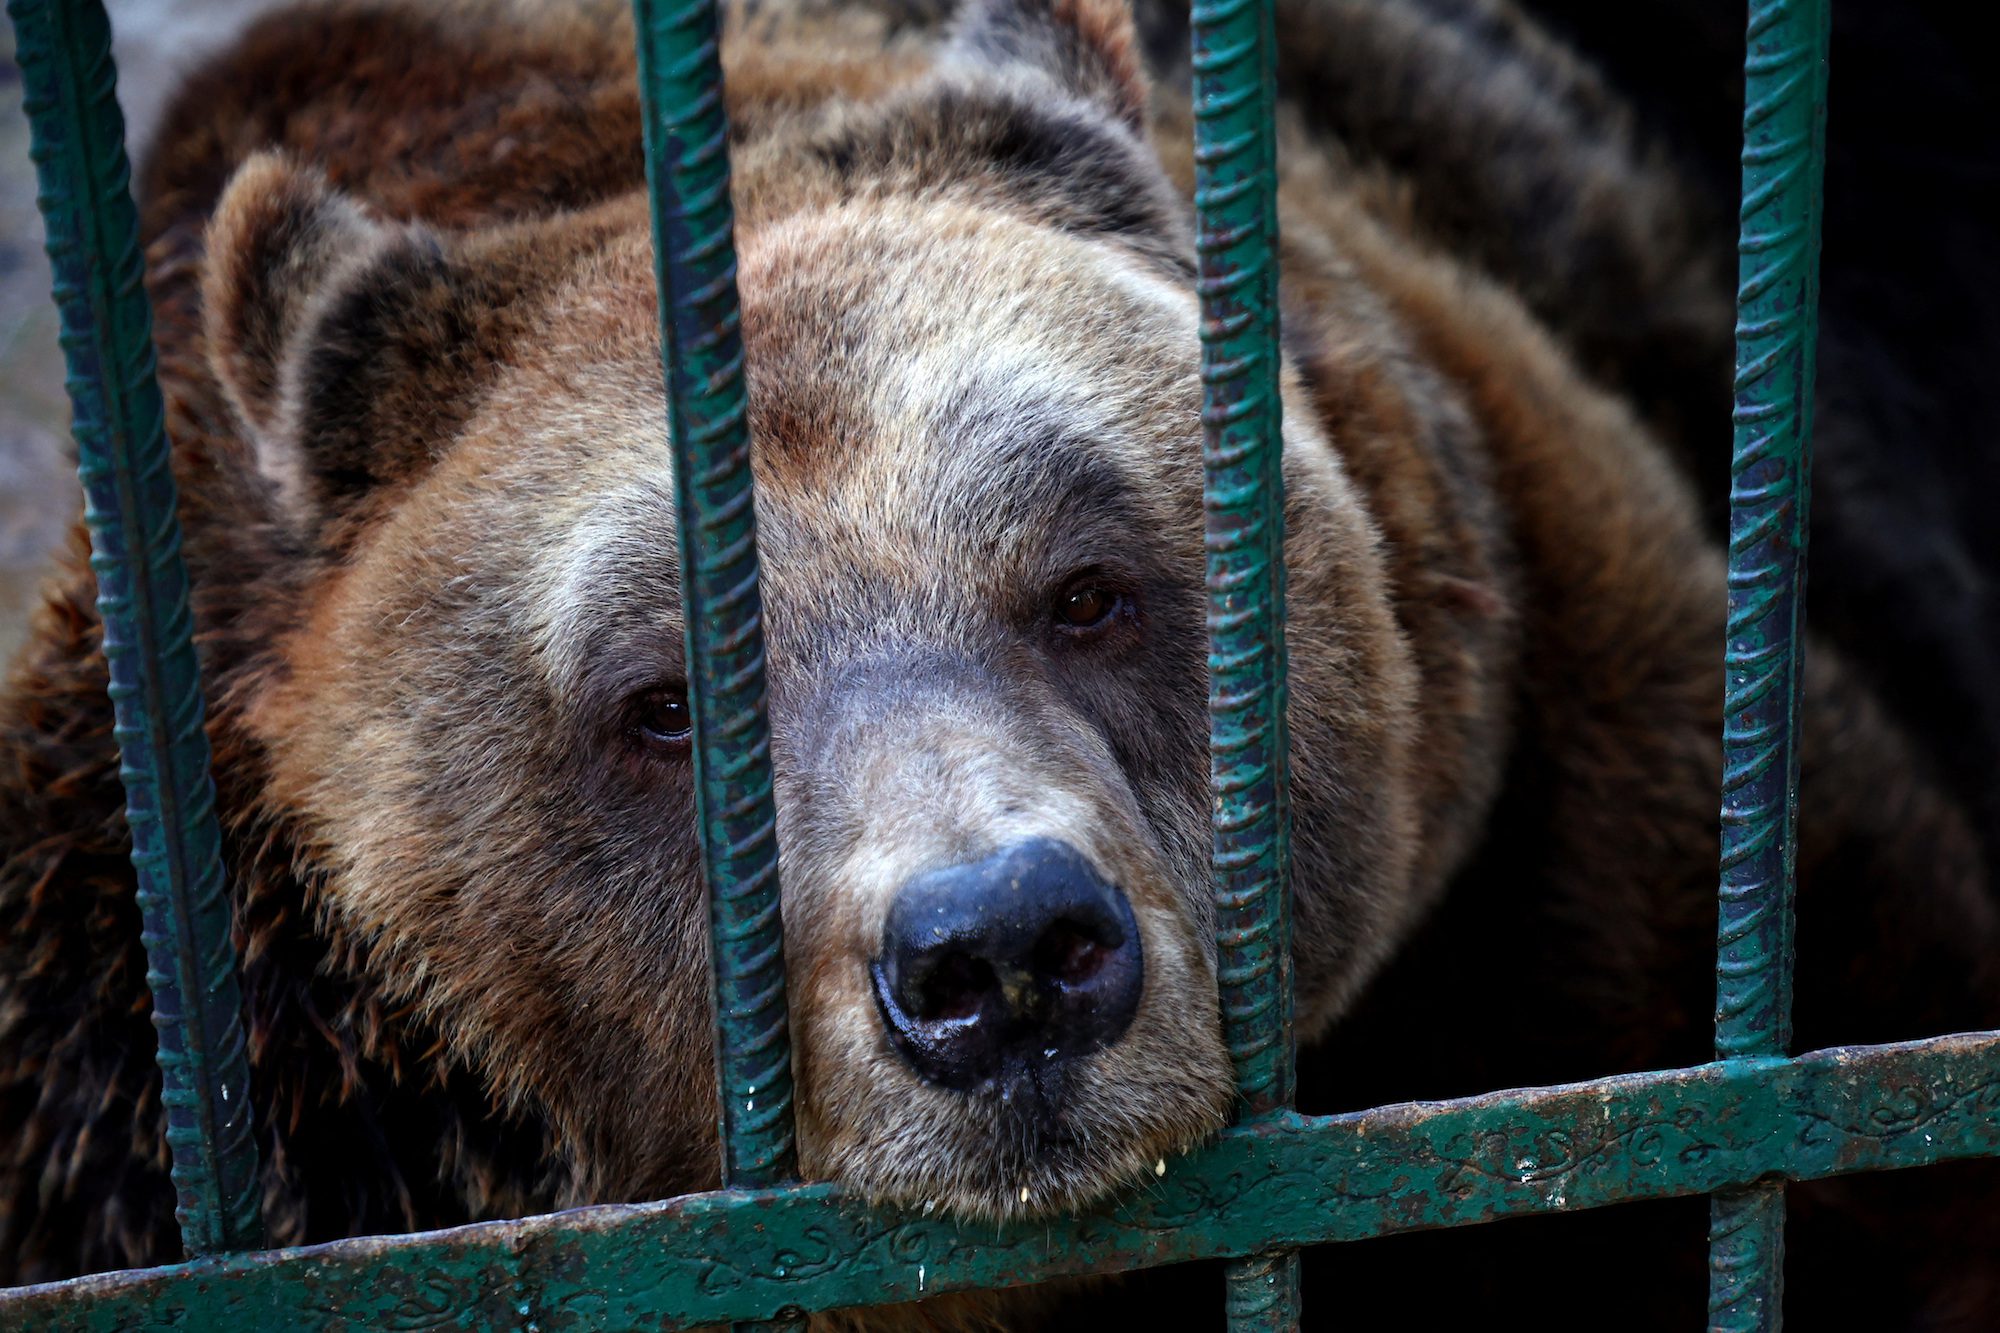 Mark, a 24 year old brown bear sits inside a cage in a restaurant in Tirana, Albania, December 5, 2022. REUTERS/Florion Goga